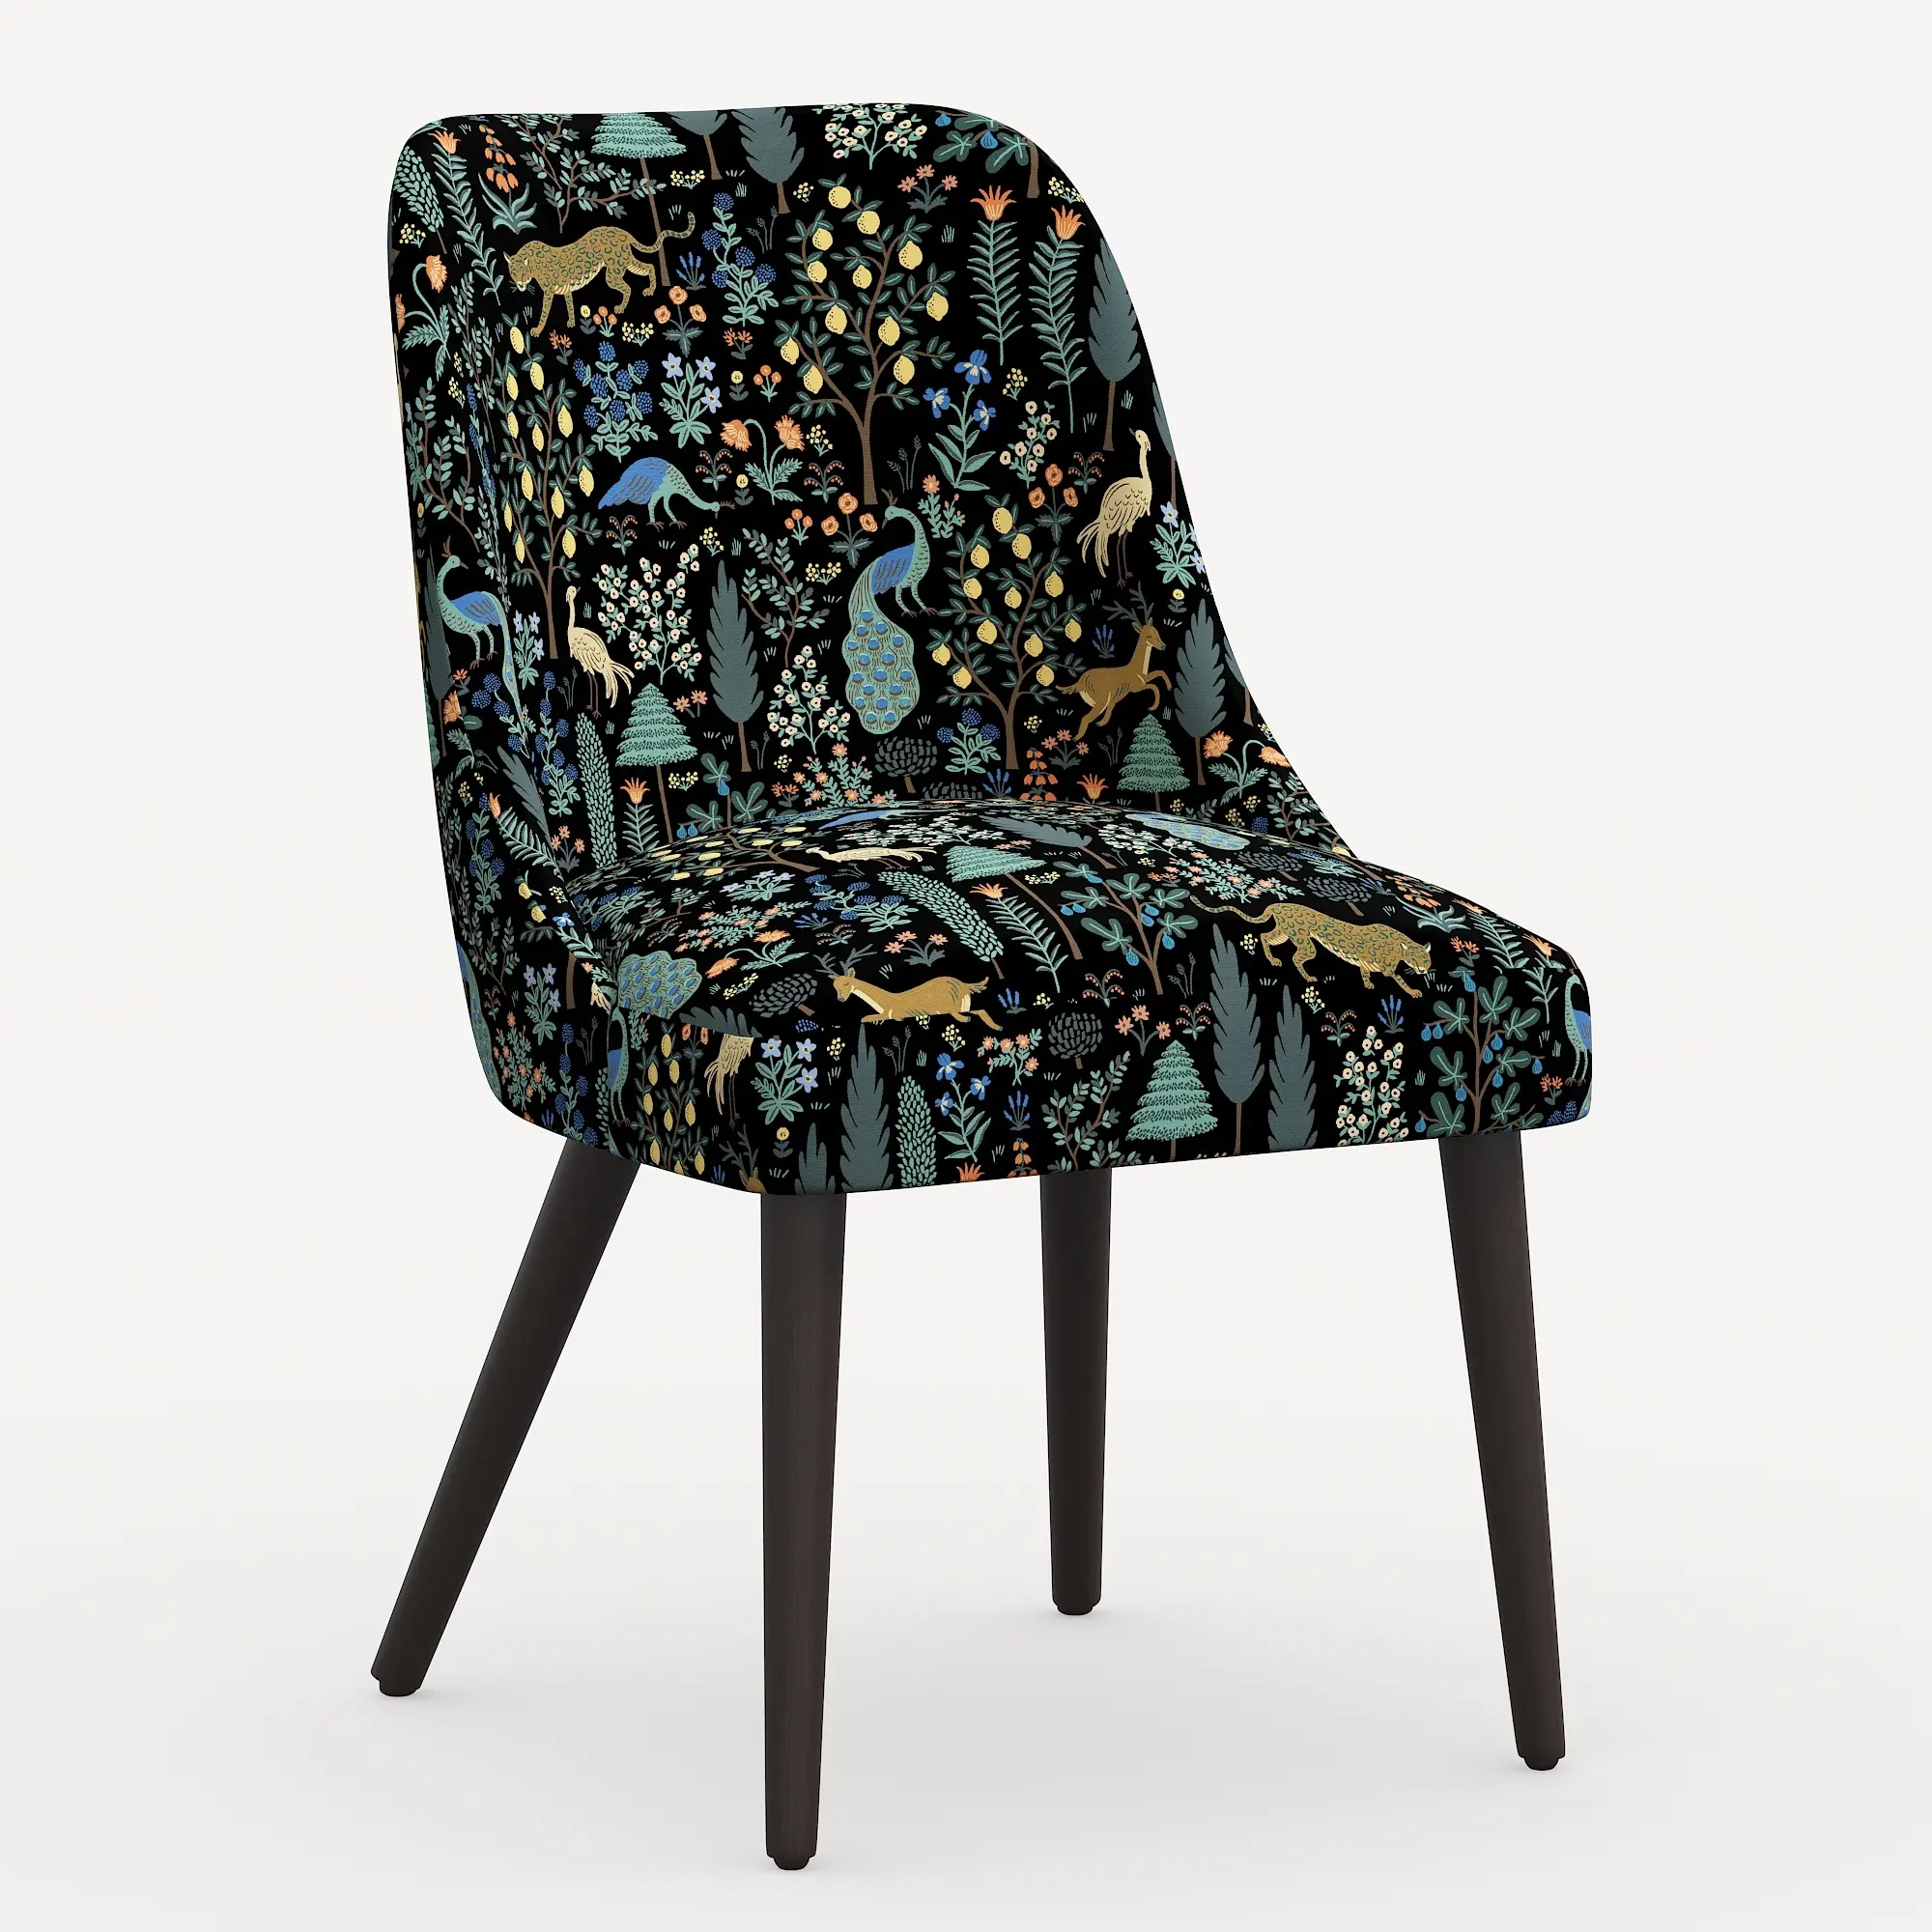 84-6RPCMNBLKLCB Rifle Paper Co. Clare Menagerie Black Dining Chair sku 84-6RPCMNBLKLCB